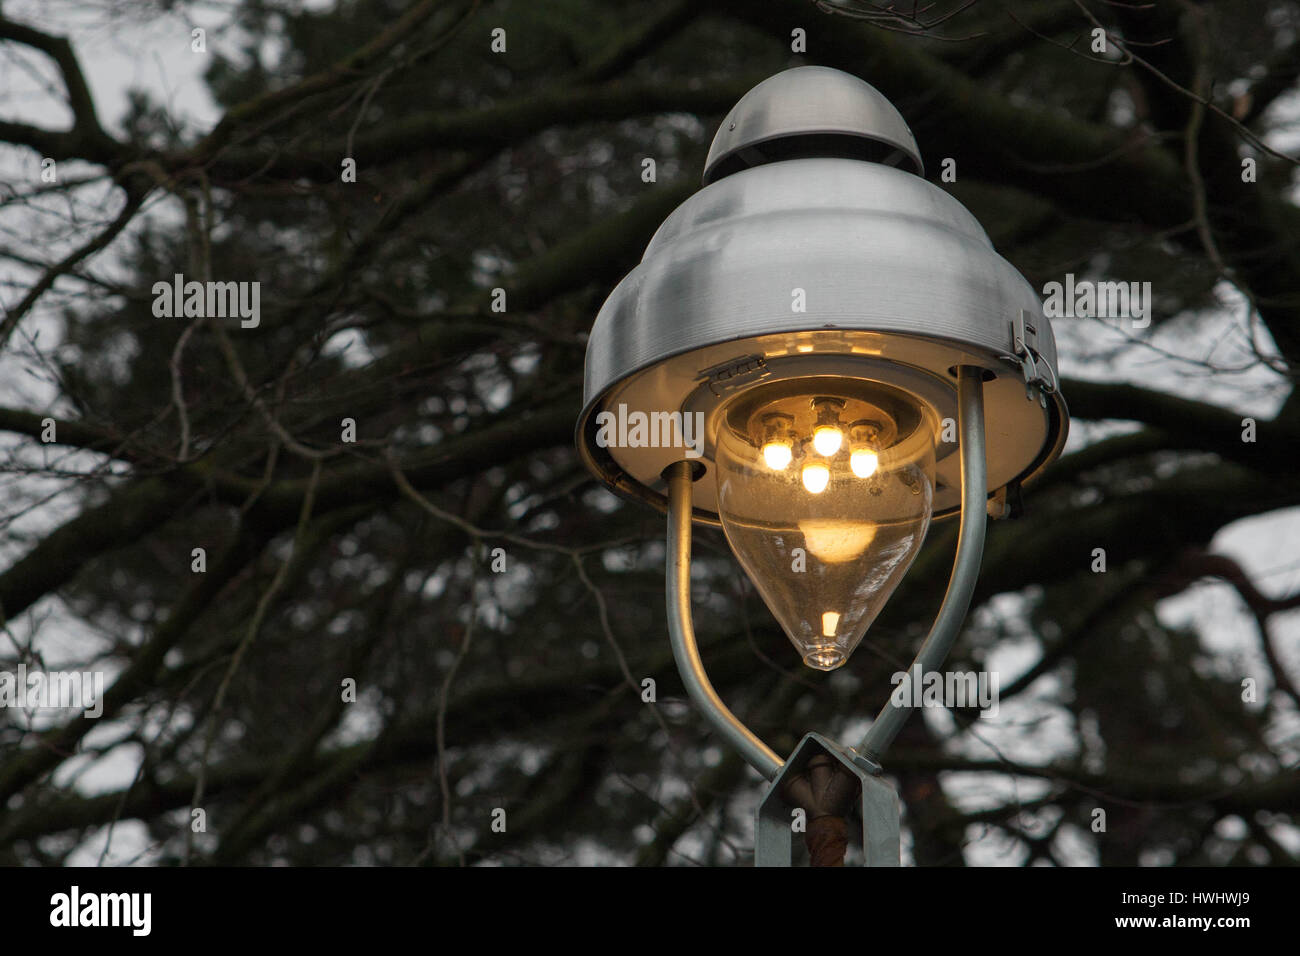 Historical four-burner gas lantern in Berlin Zehlendorf. The Photograph was captured shortly before the evening dusk, on the a cloudy day. Stock Photo